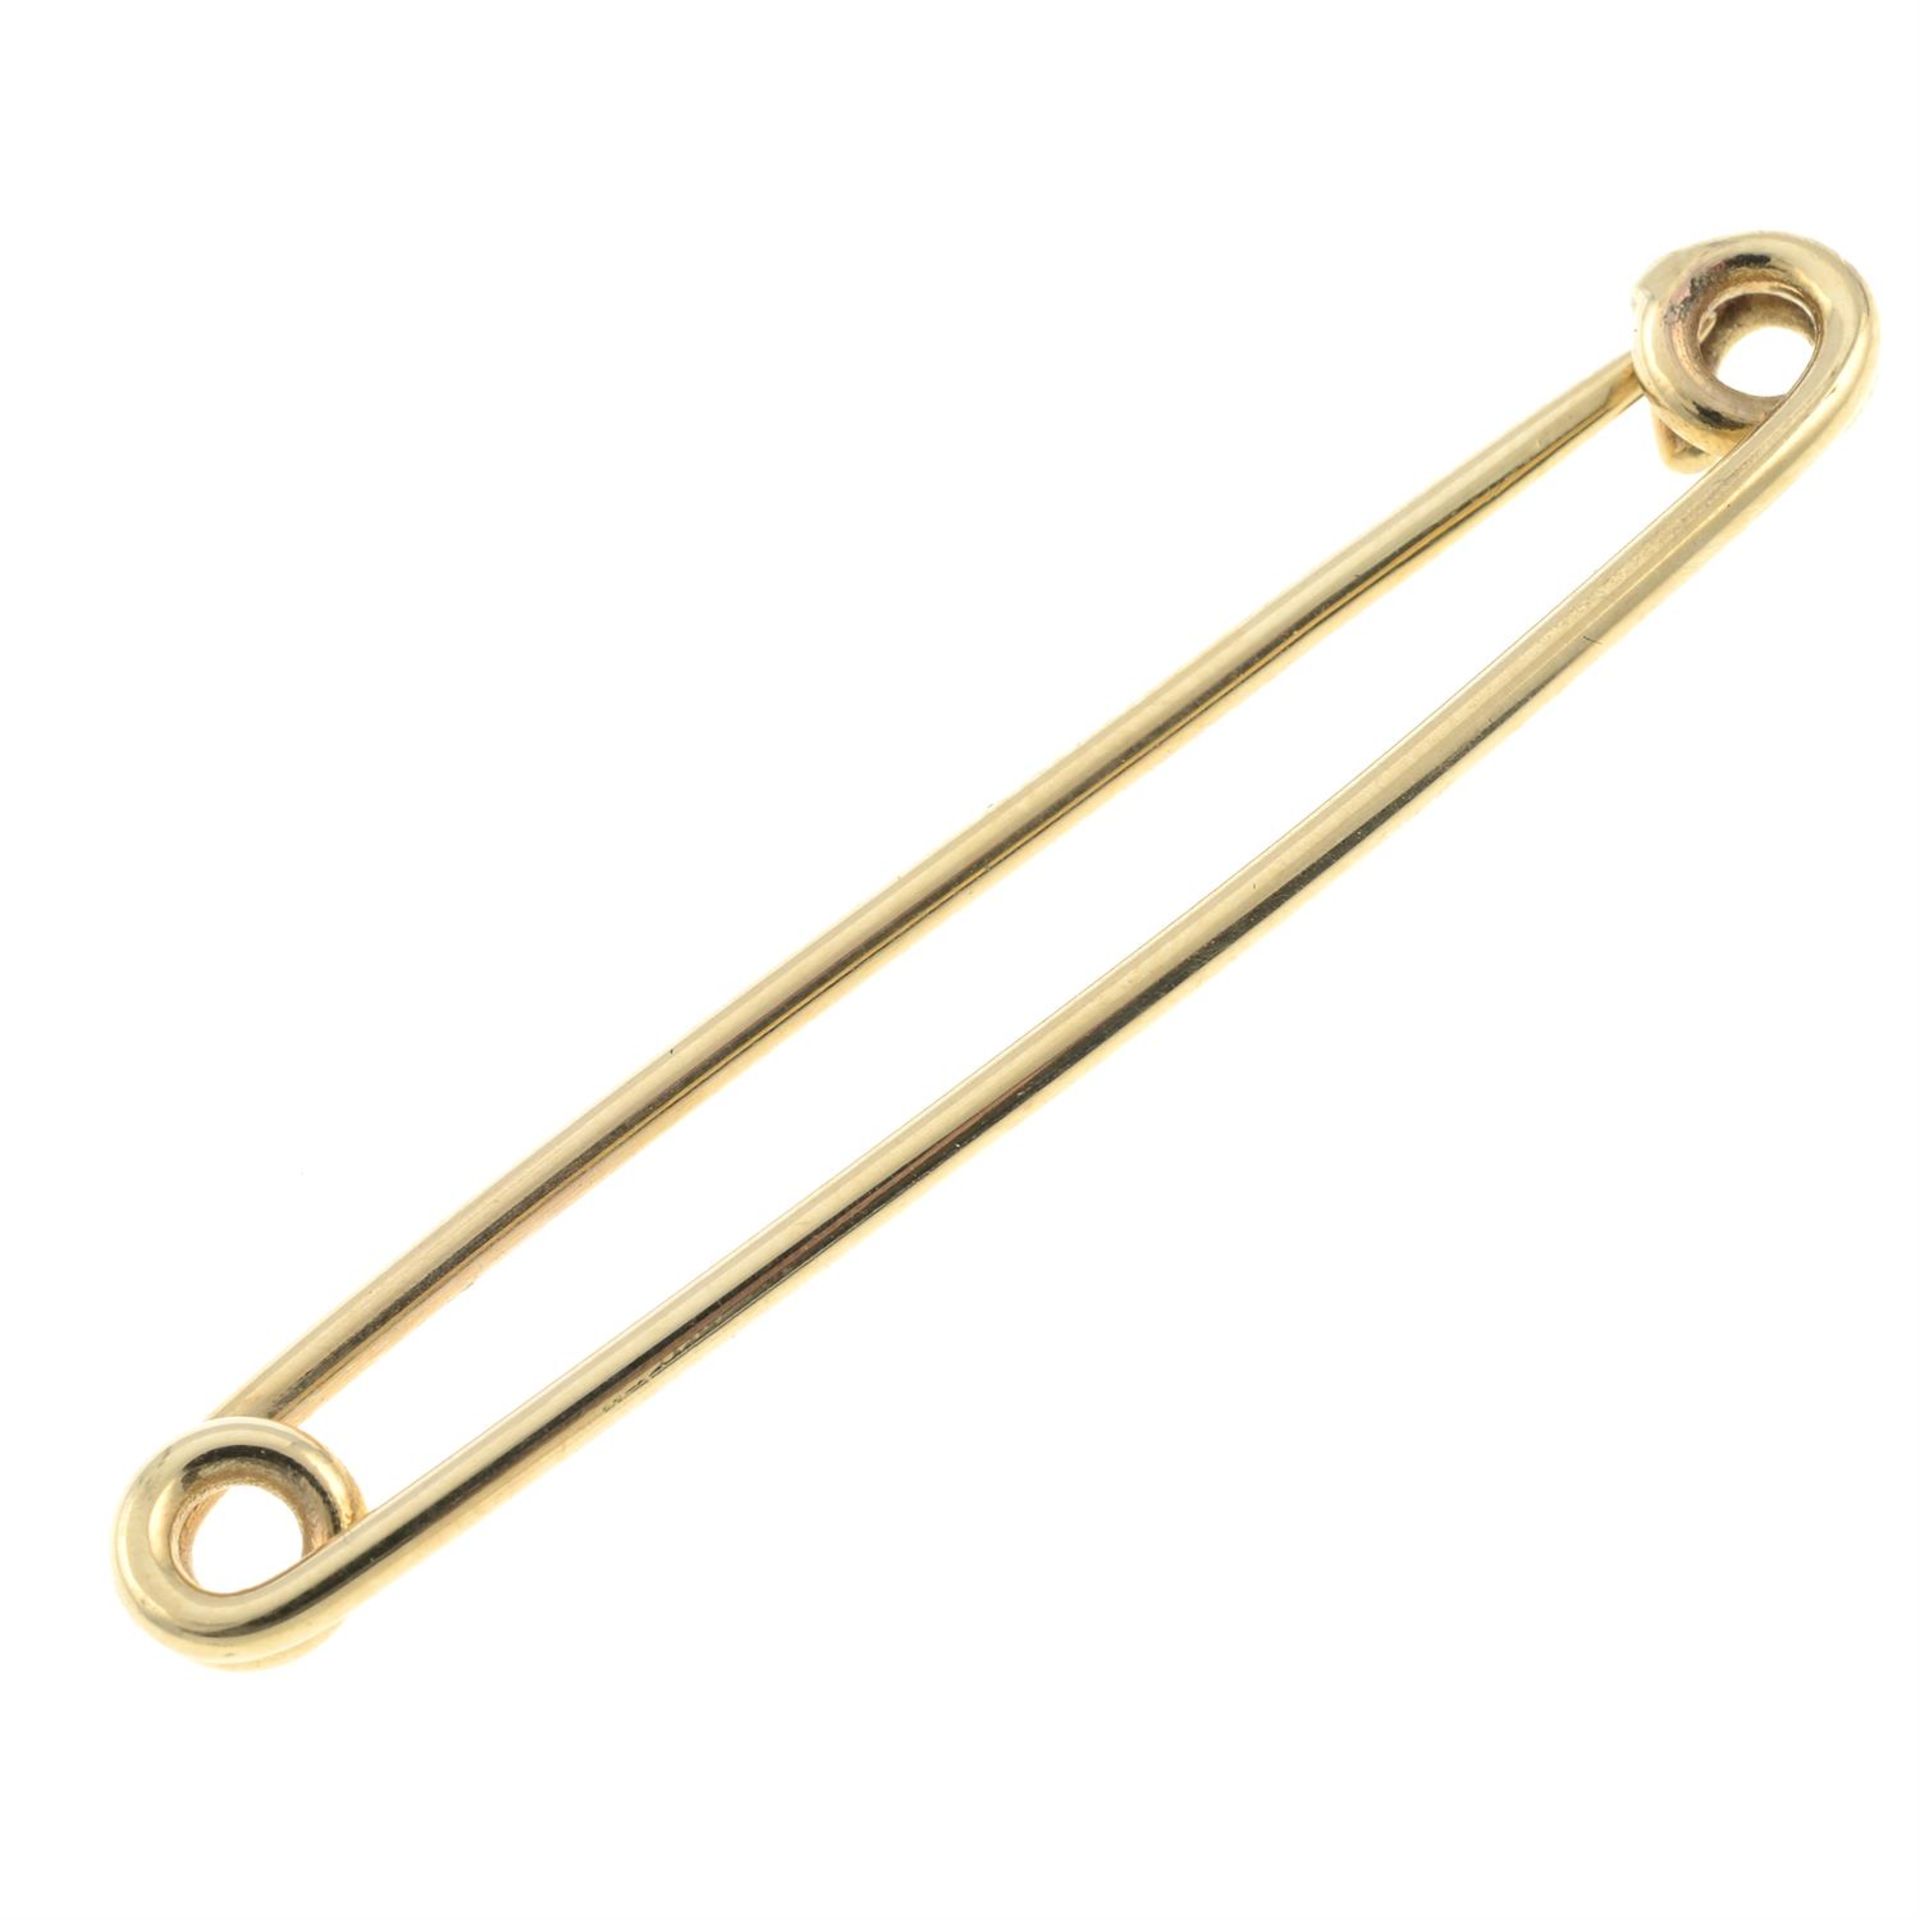 A 9ct gold safety pin. - Image 2 of 2